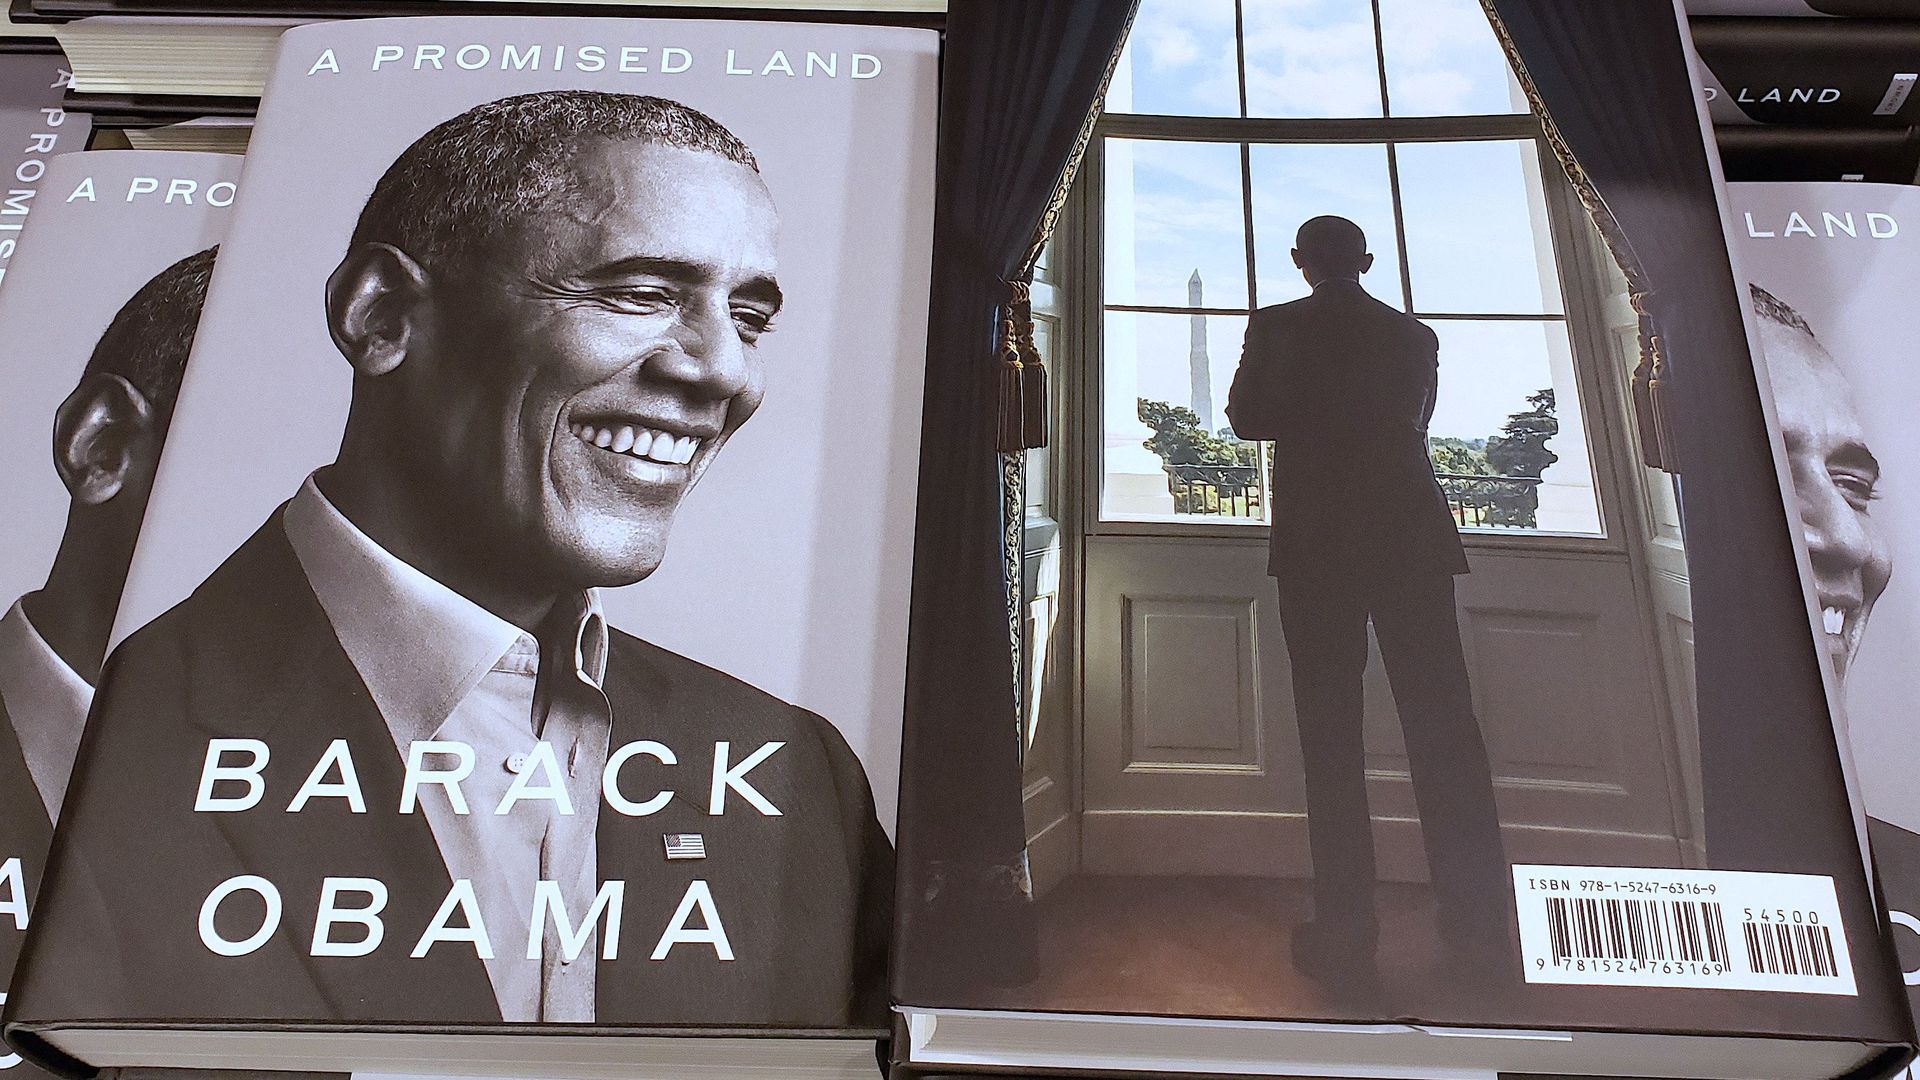 Obama S A Promised Land To Become Best Selling Presidential Memoir Axios